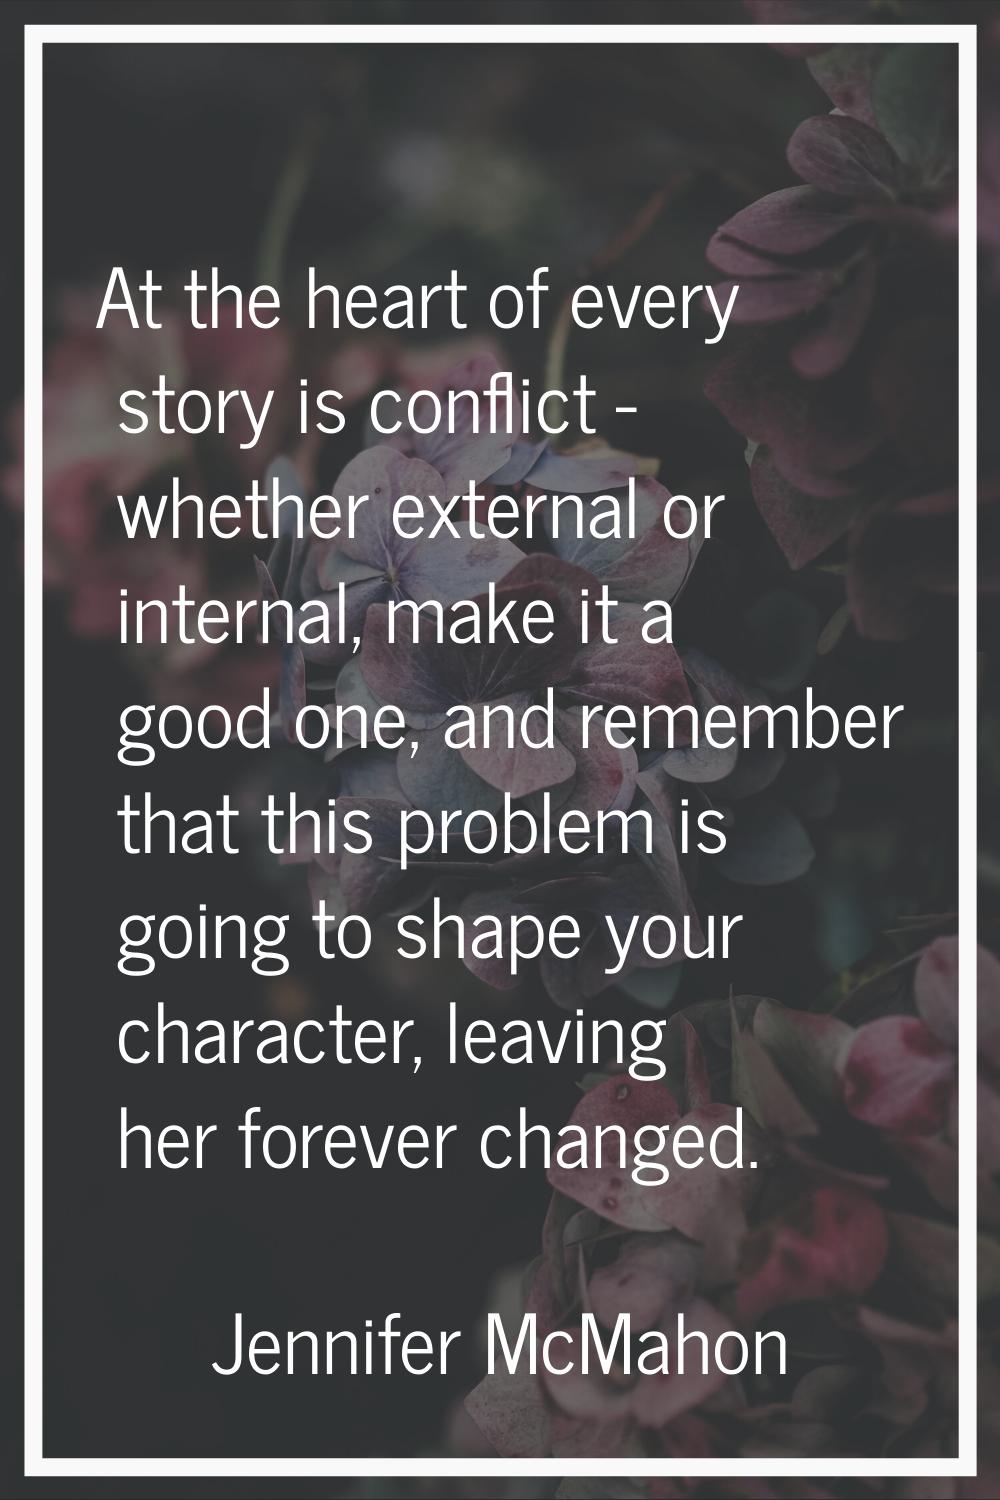 At the heart of every story is conflict - whether external or internal, make it a good one, and rem